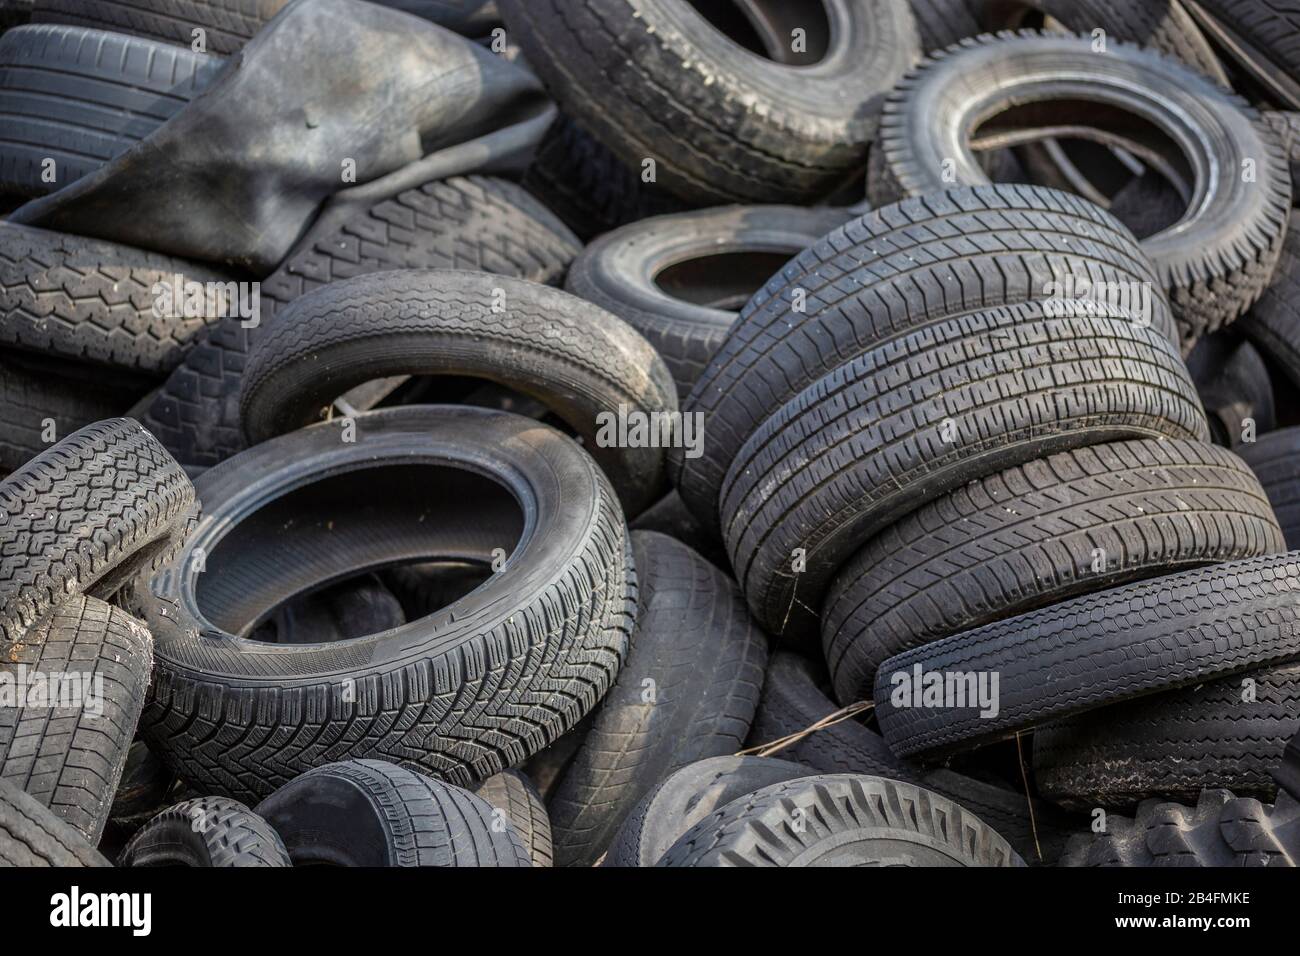 old worn tires of different motor vehicles Stock Photo